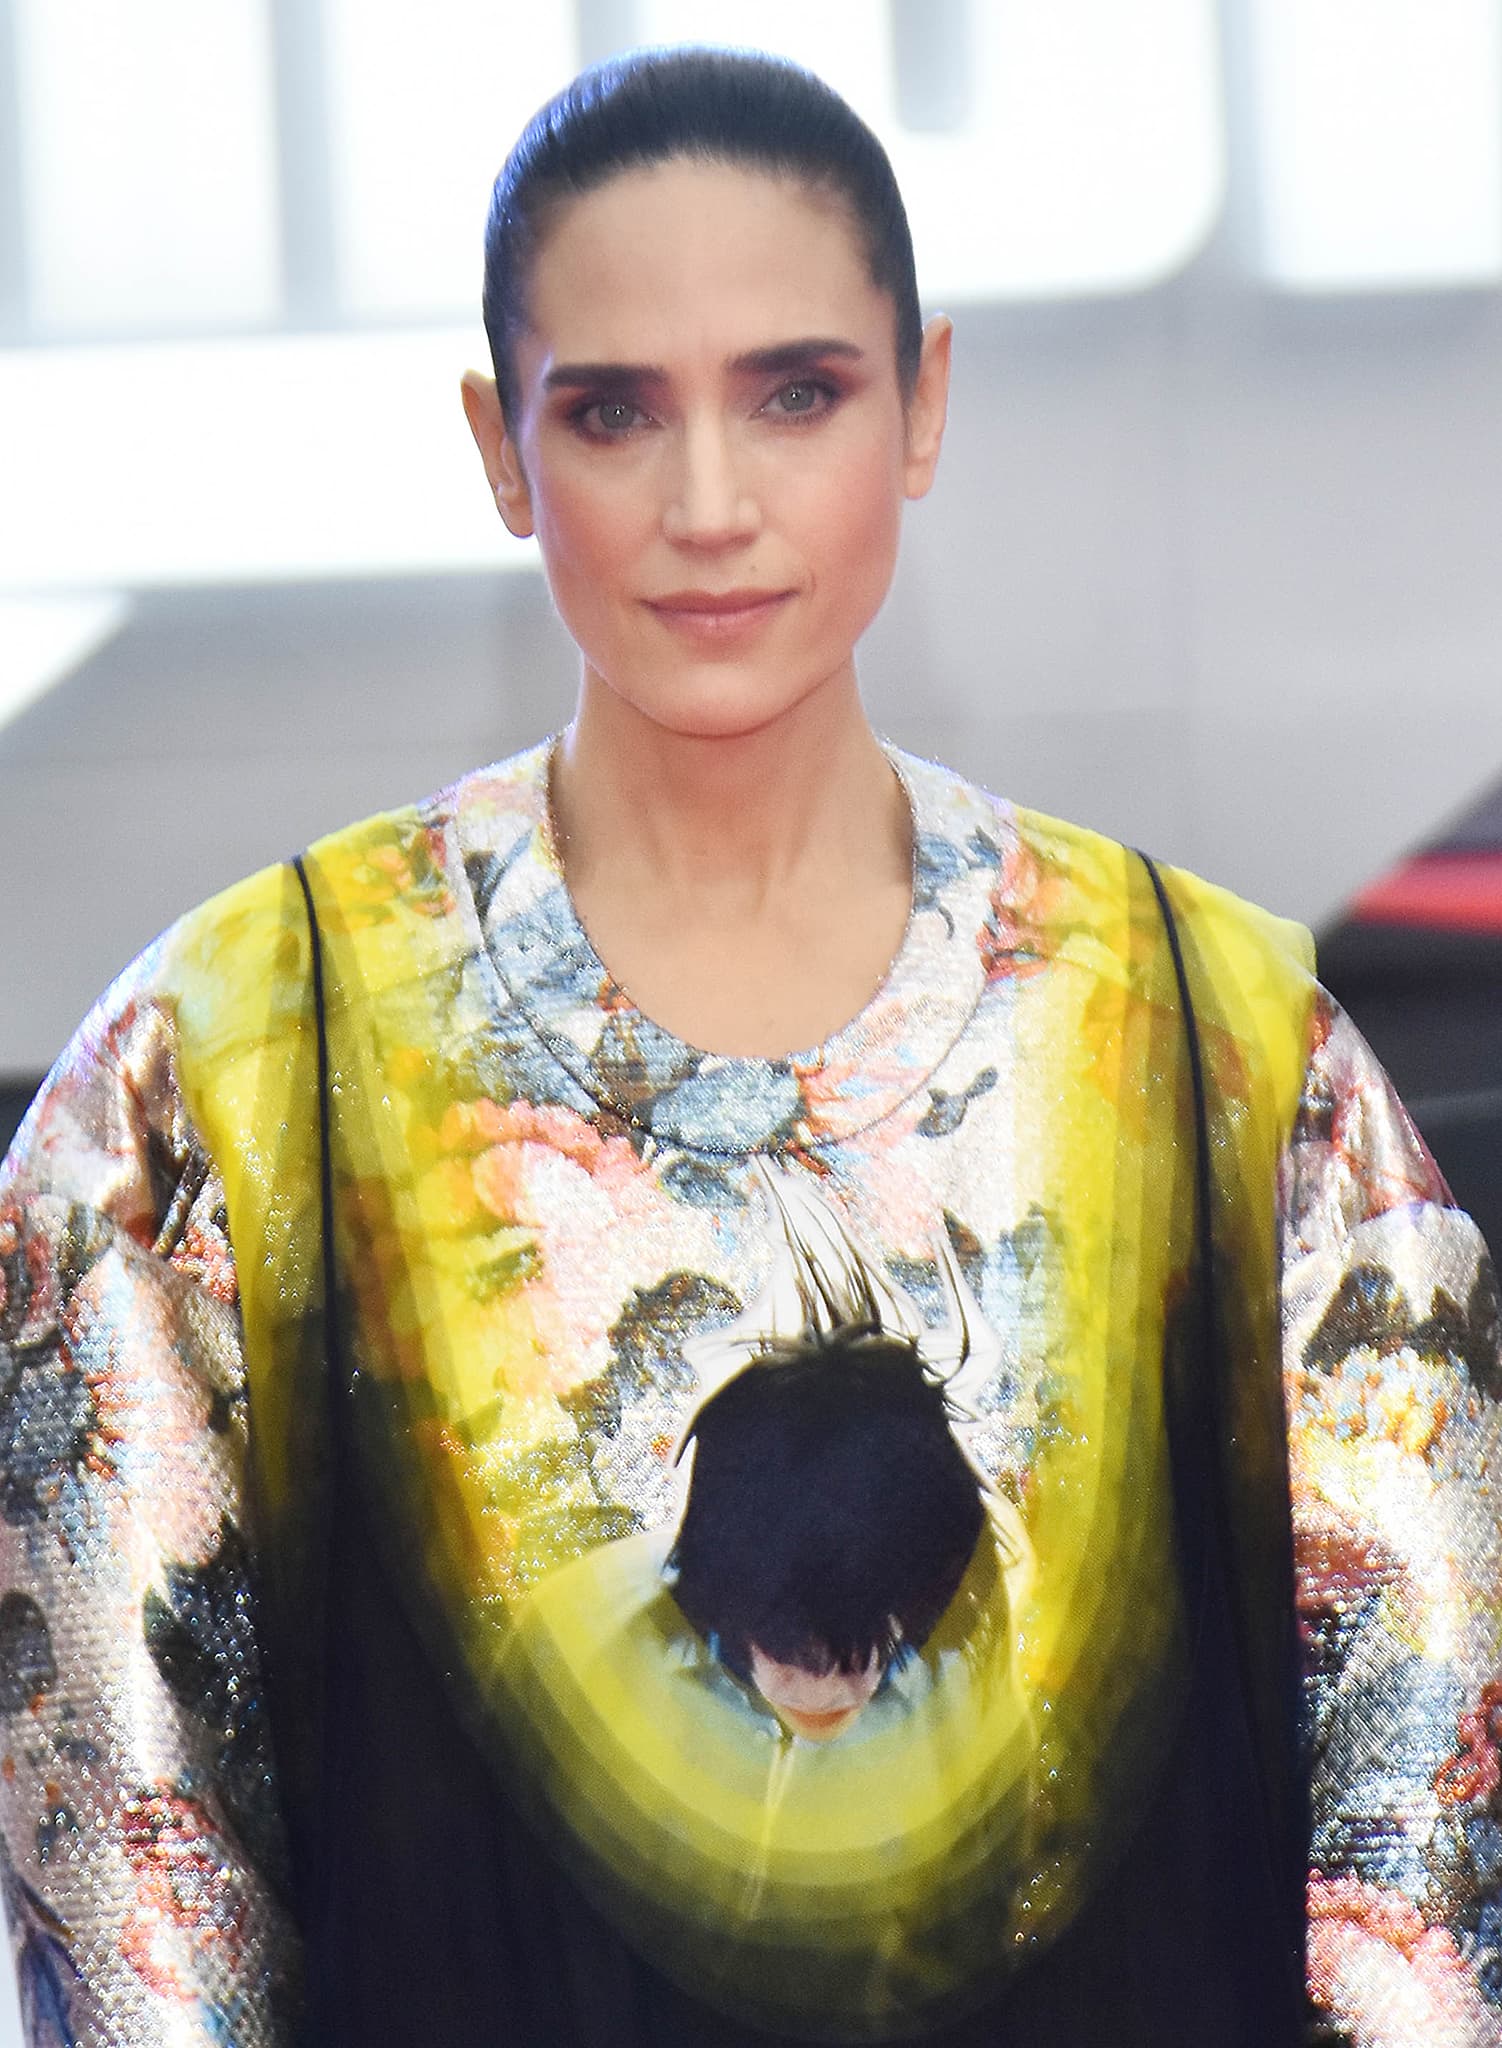 Jennifer Connelly styles her dark hair in a sleek bun and sports smokey eyeshadow and nude pink lipstick